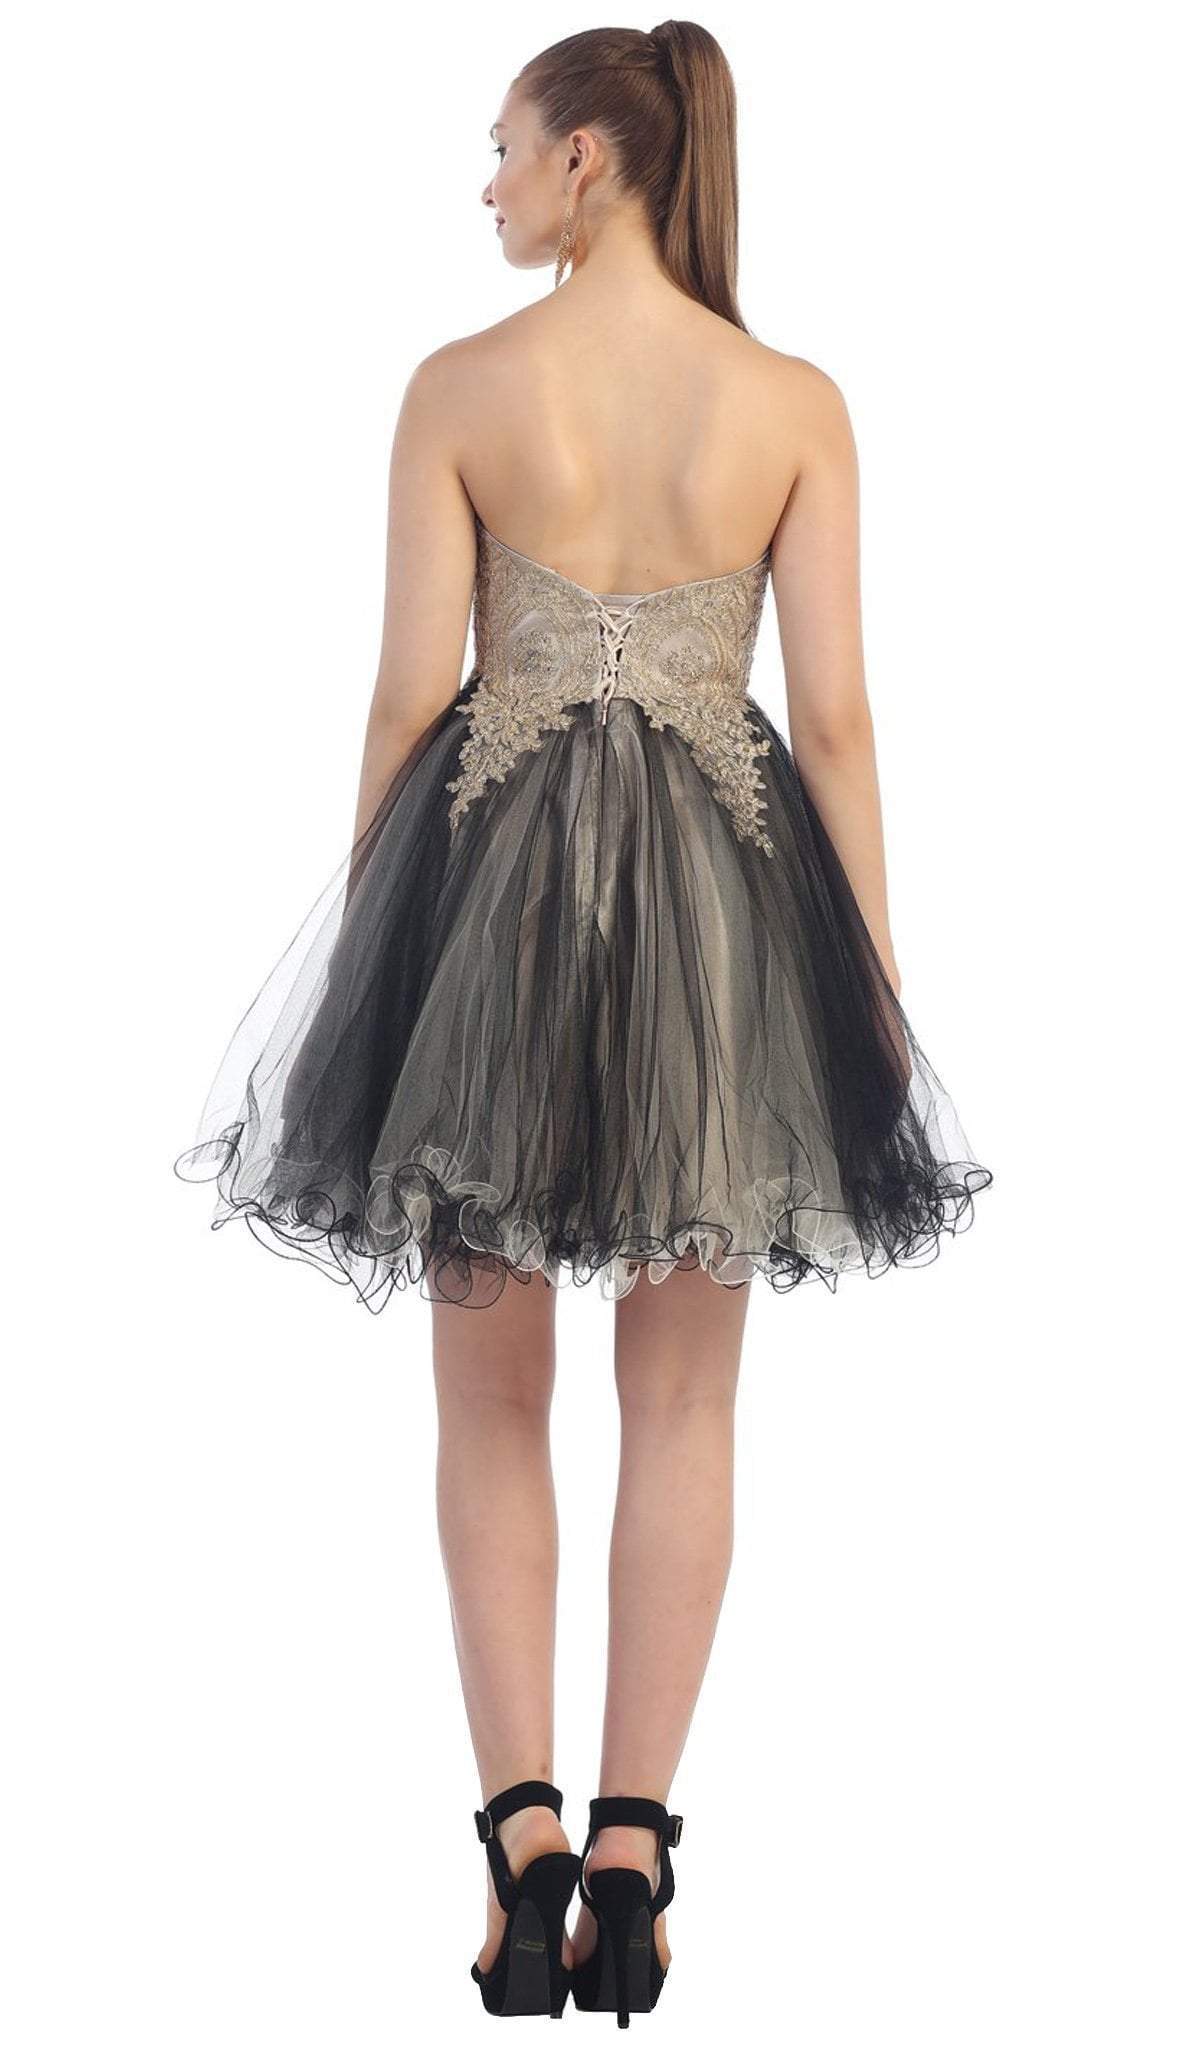 May Queen - MQ-1286 Strapless Appliqued Cocktail Dress Special Occasion Dress